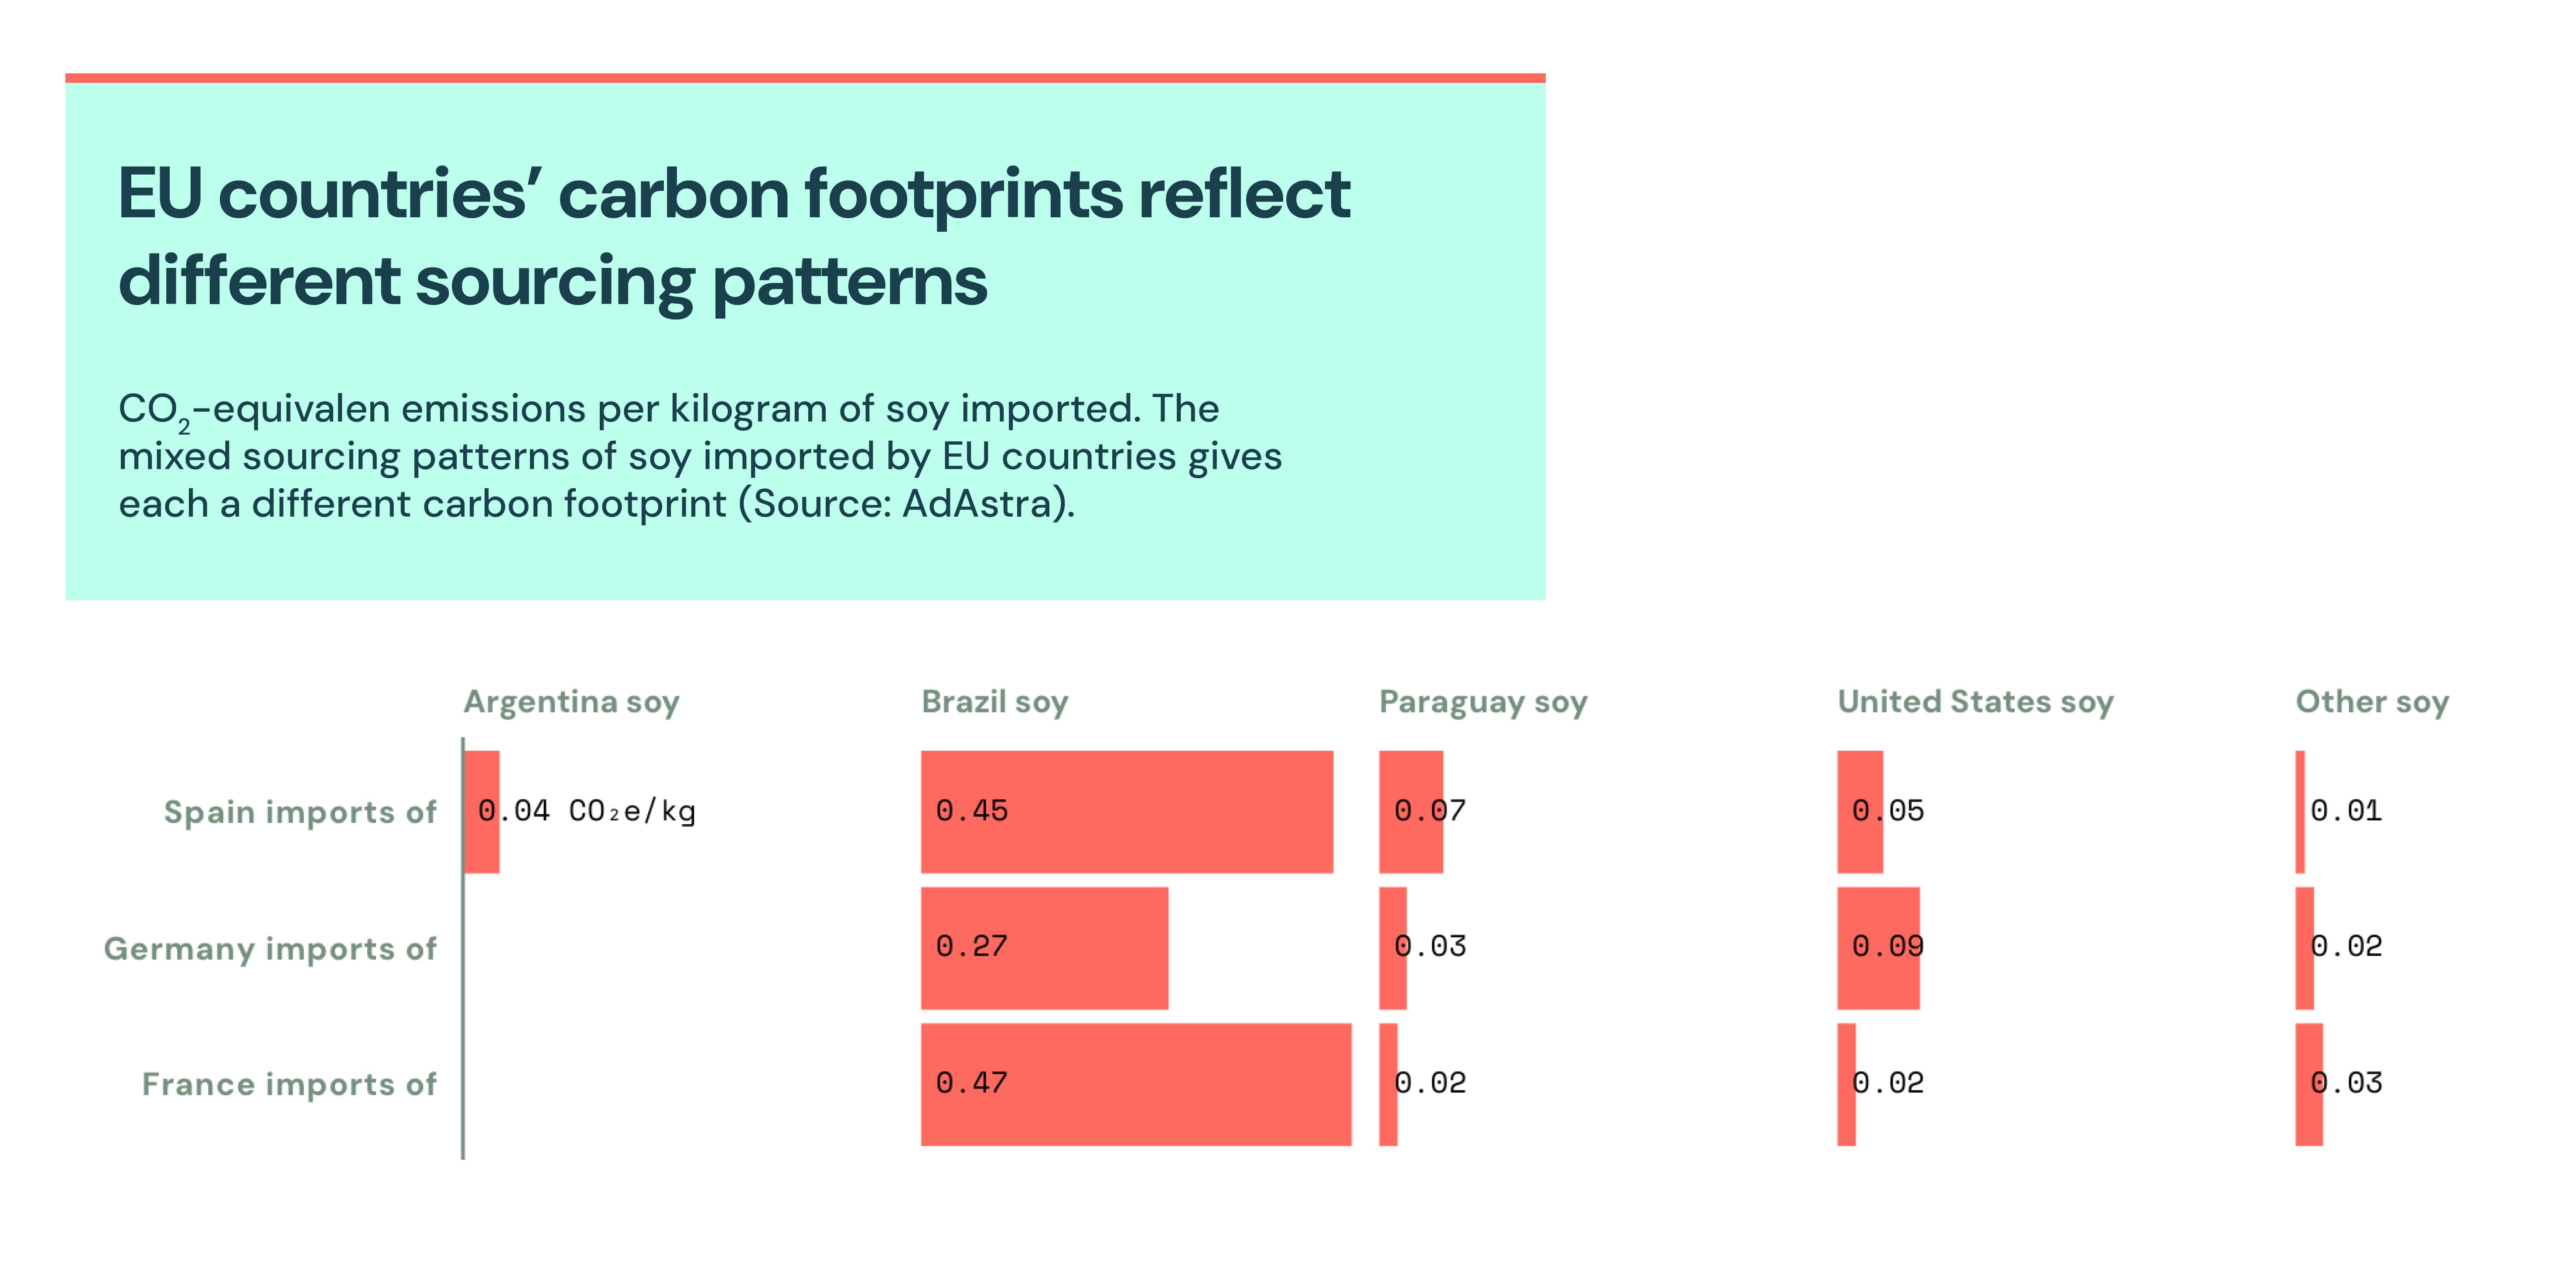 EU countries’ carbon footprints reflect different sourcing patterns, CO₂-equivalent emissions per kilogram of soy imported. The mixed sourcing patterns of soy imported by EU countries gives each a different carbon footprint (Source: AdAstra).